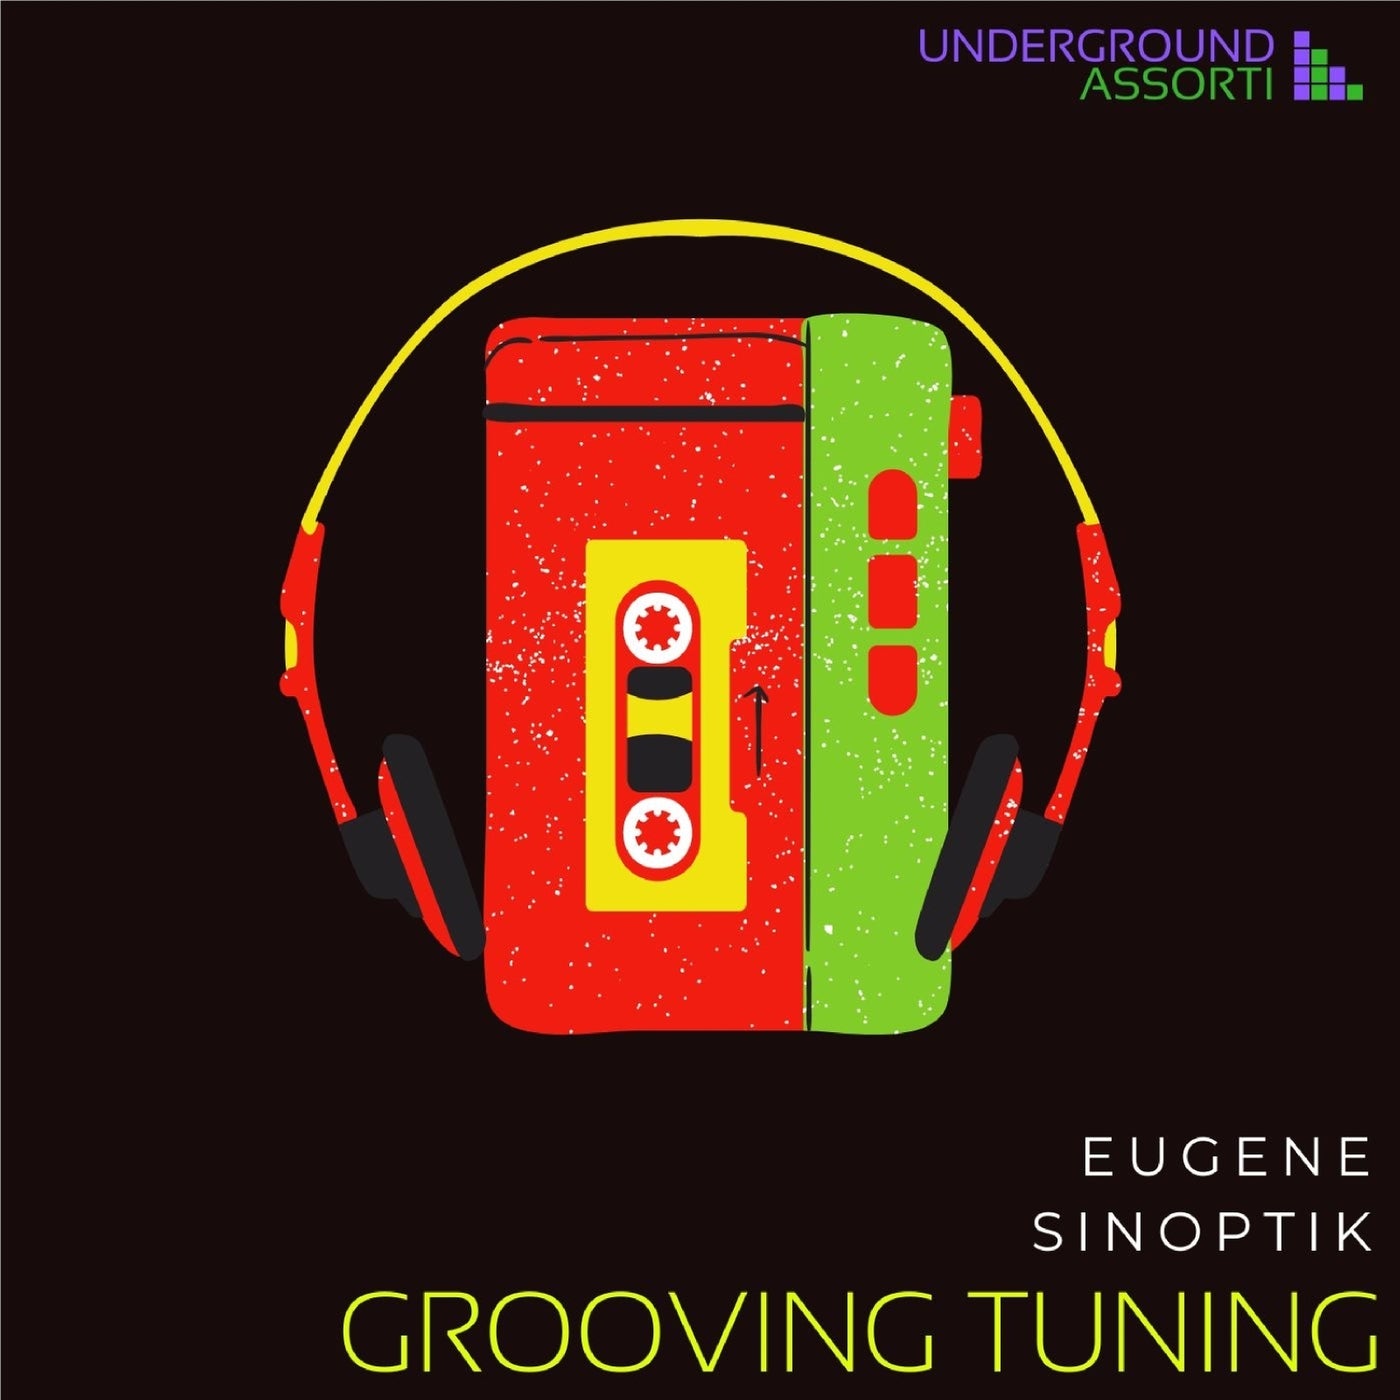 Grooving Tuning